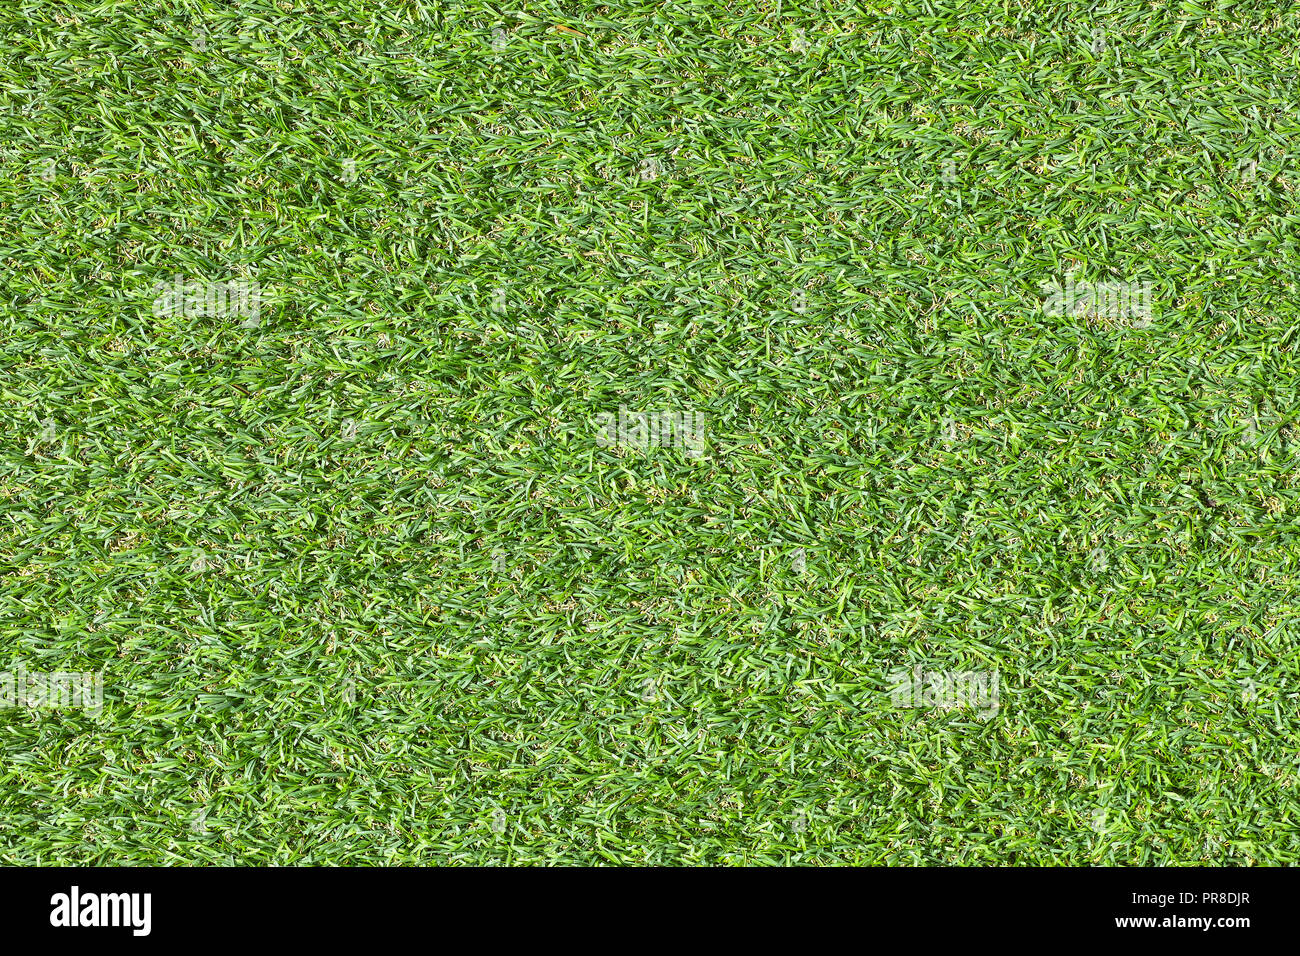 Green grass field texture top view artificial grass use us sport stadium or construction decor natural concept background Stock Photo